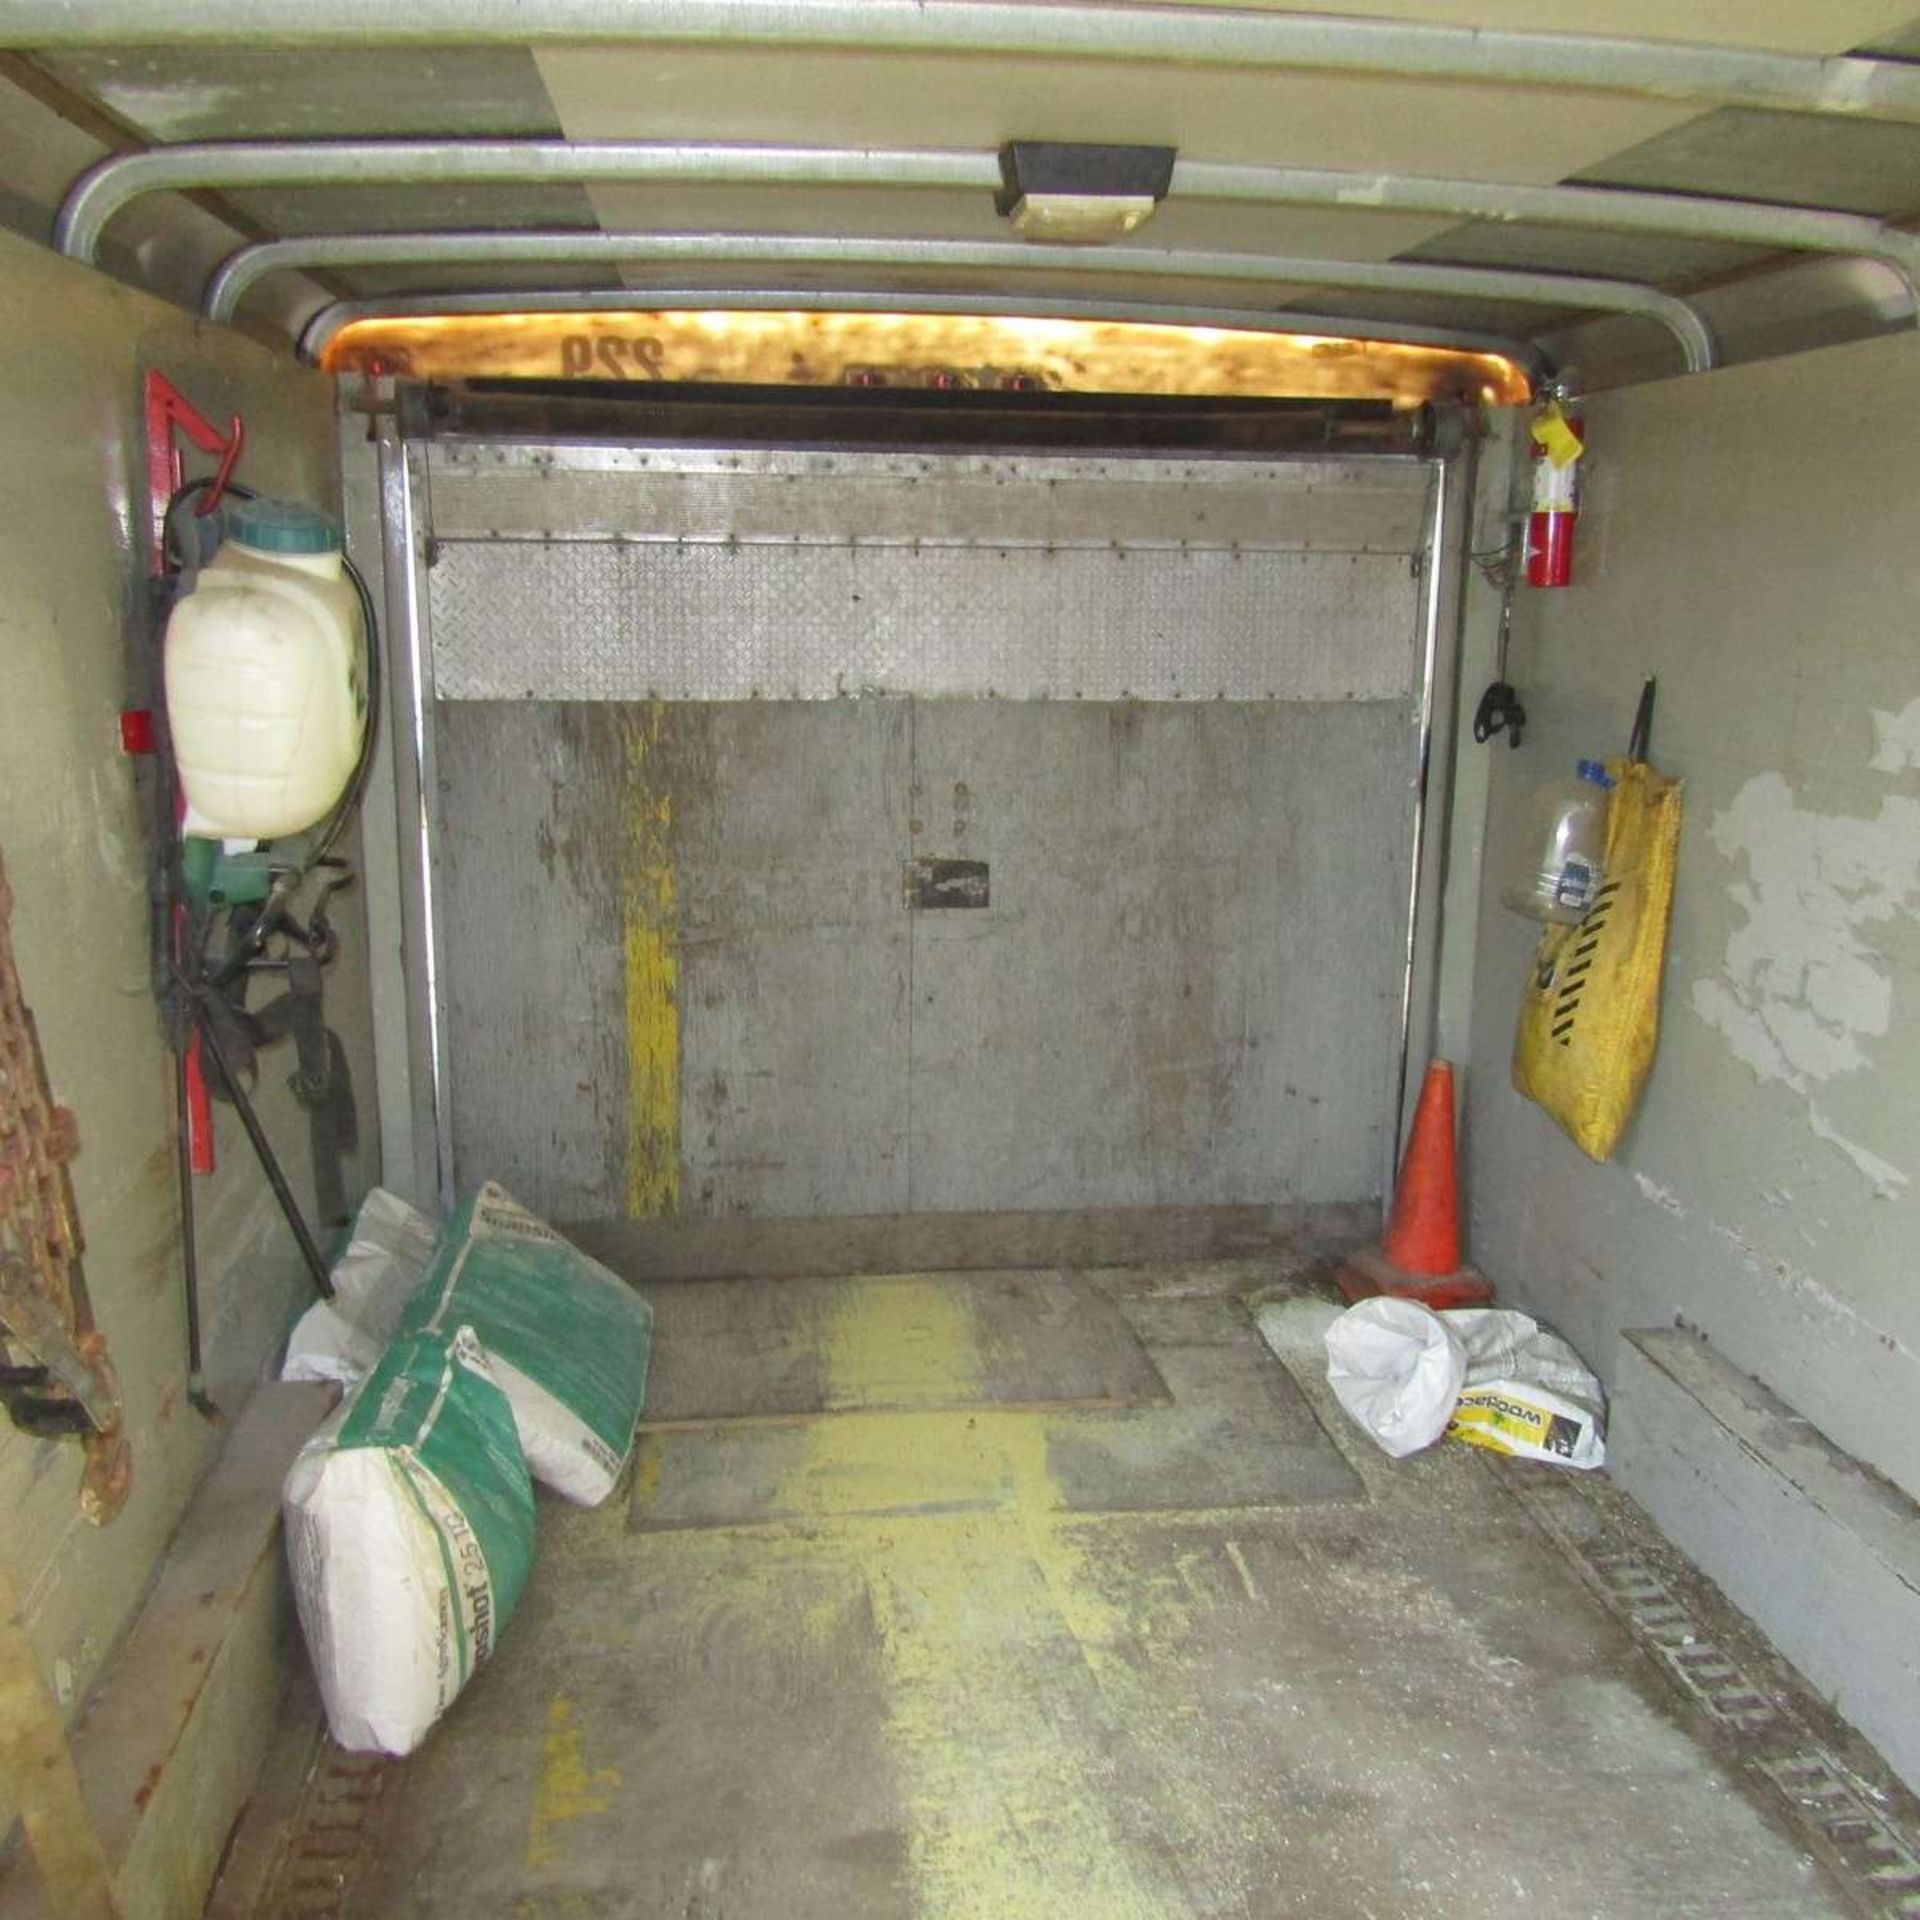 Wells Cargo LW1622 16' Enclosed Trailer - Image 4 of 4